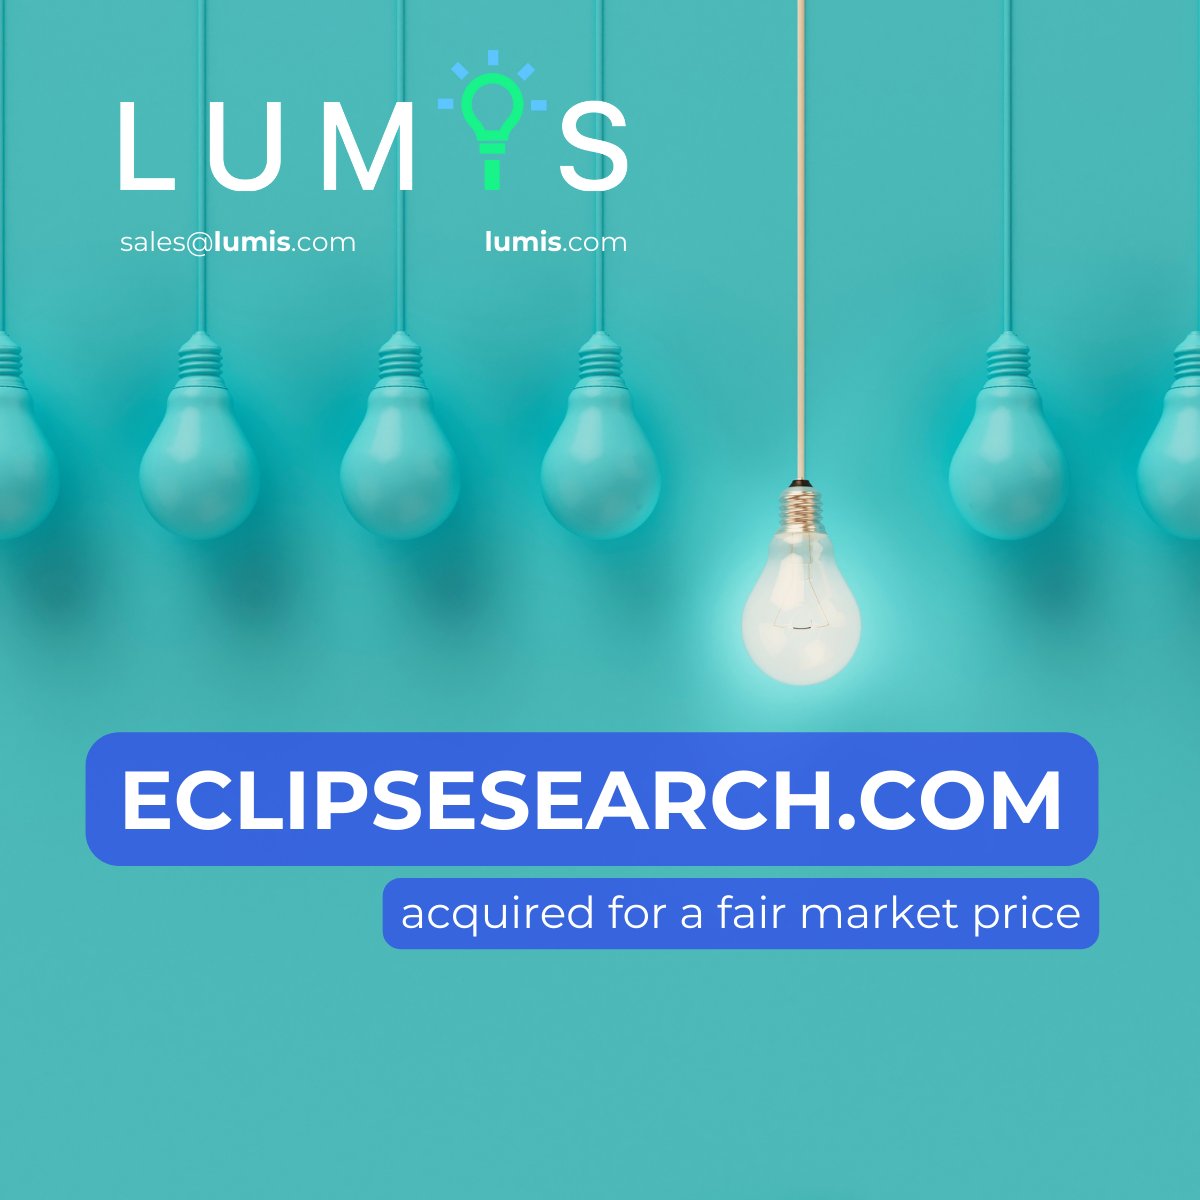 EclipseSearch.com has been acquired!